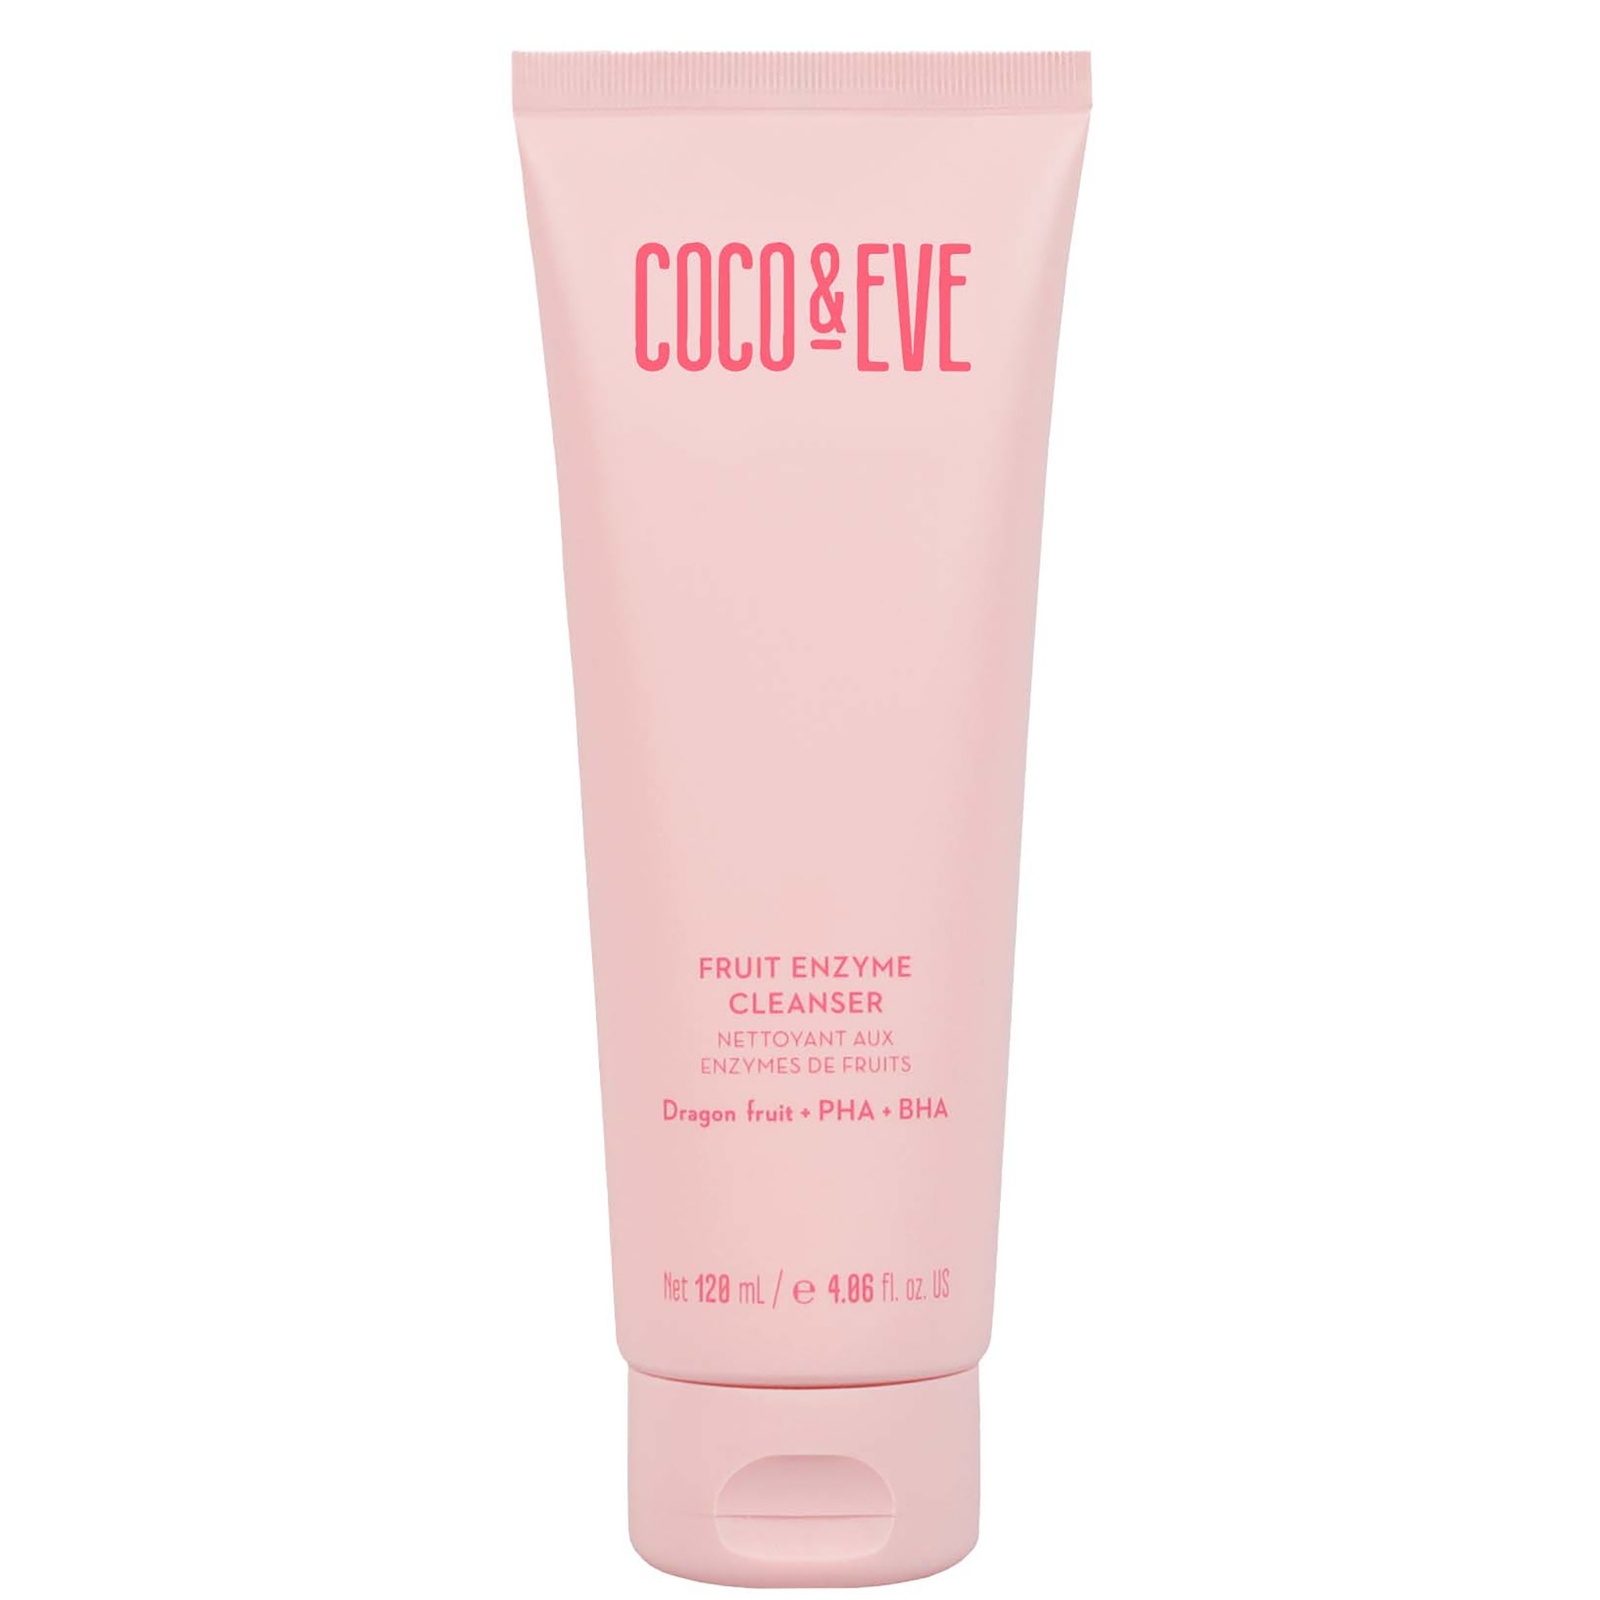 Coco & Eve Fruit Enzyme Cleanser 120ml